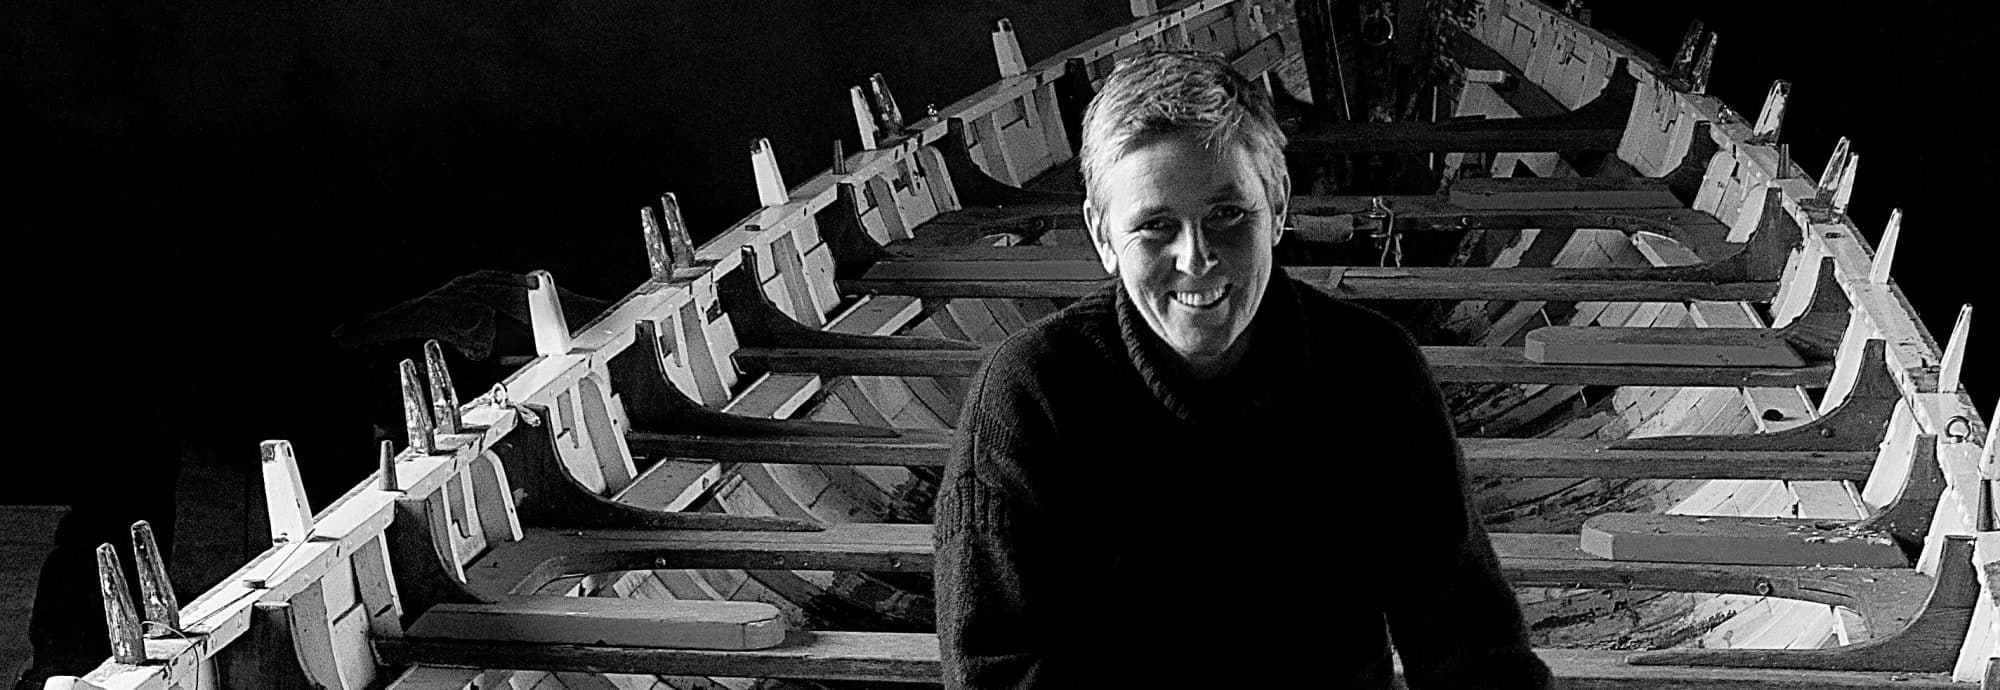 A black and white image of Gail McGarva smiling for the camera in front of a wooden boat.